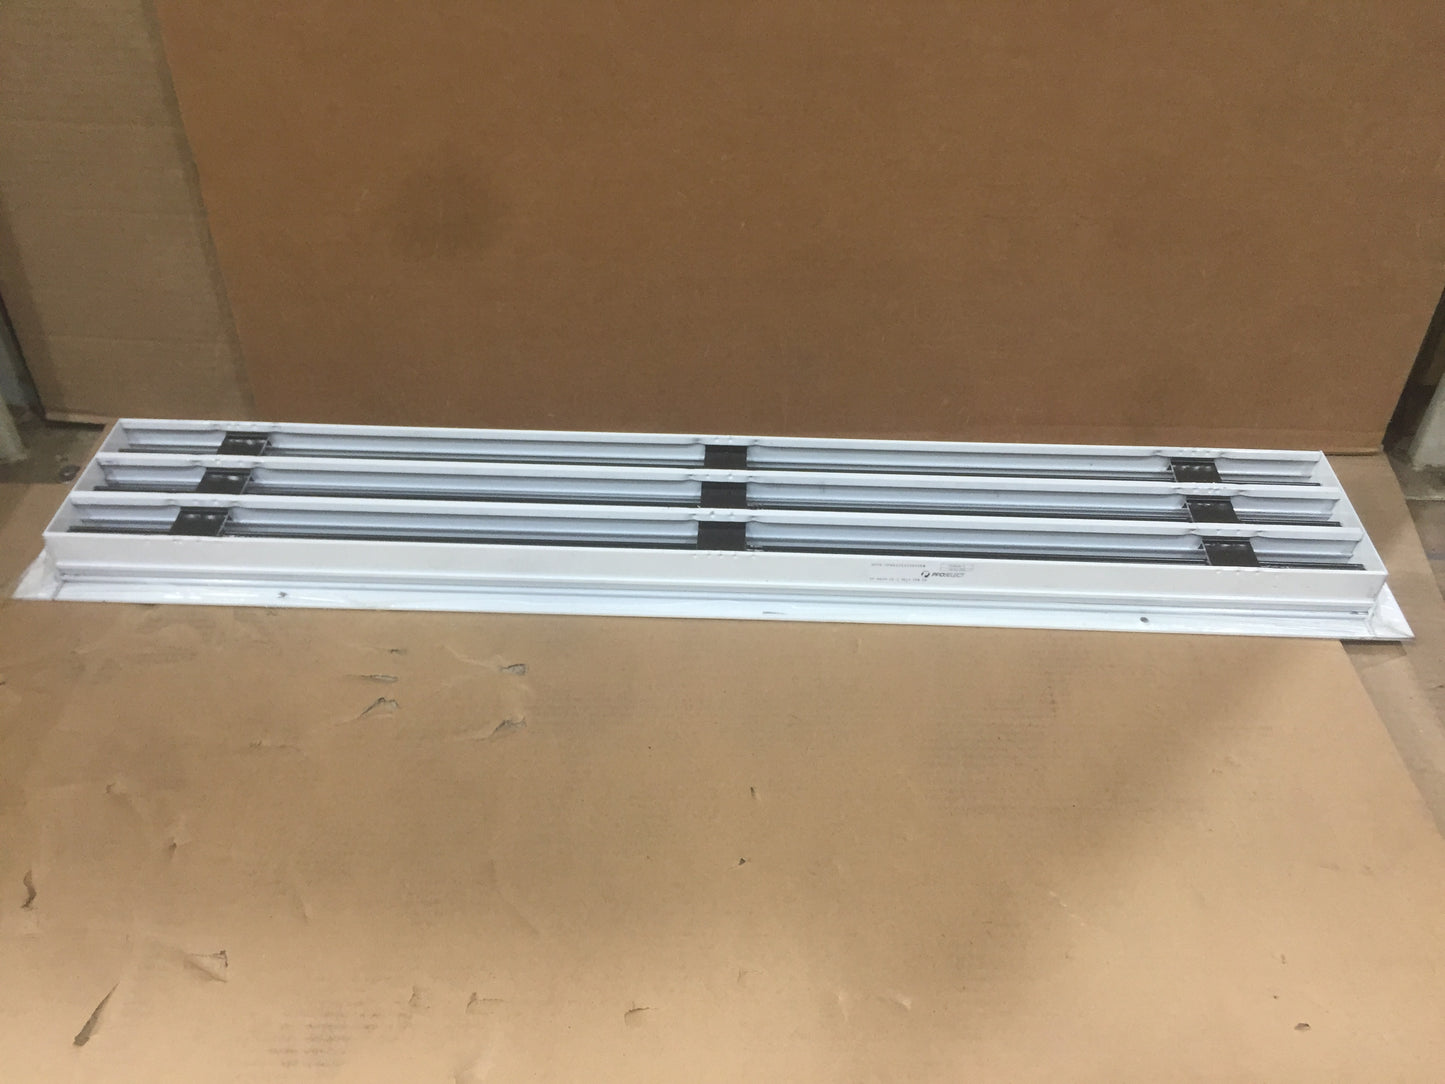 SUPPLY/RETURN LINEAR SLOT DIFFUSER **SOLD AS 1 PIECE**